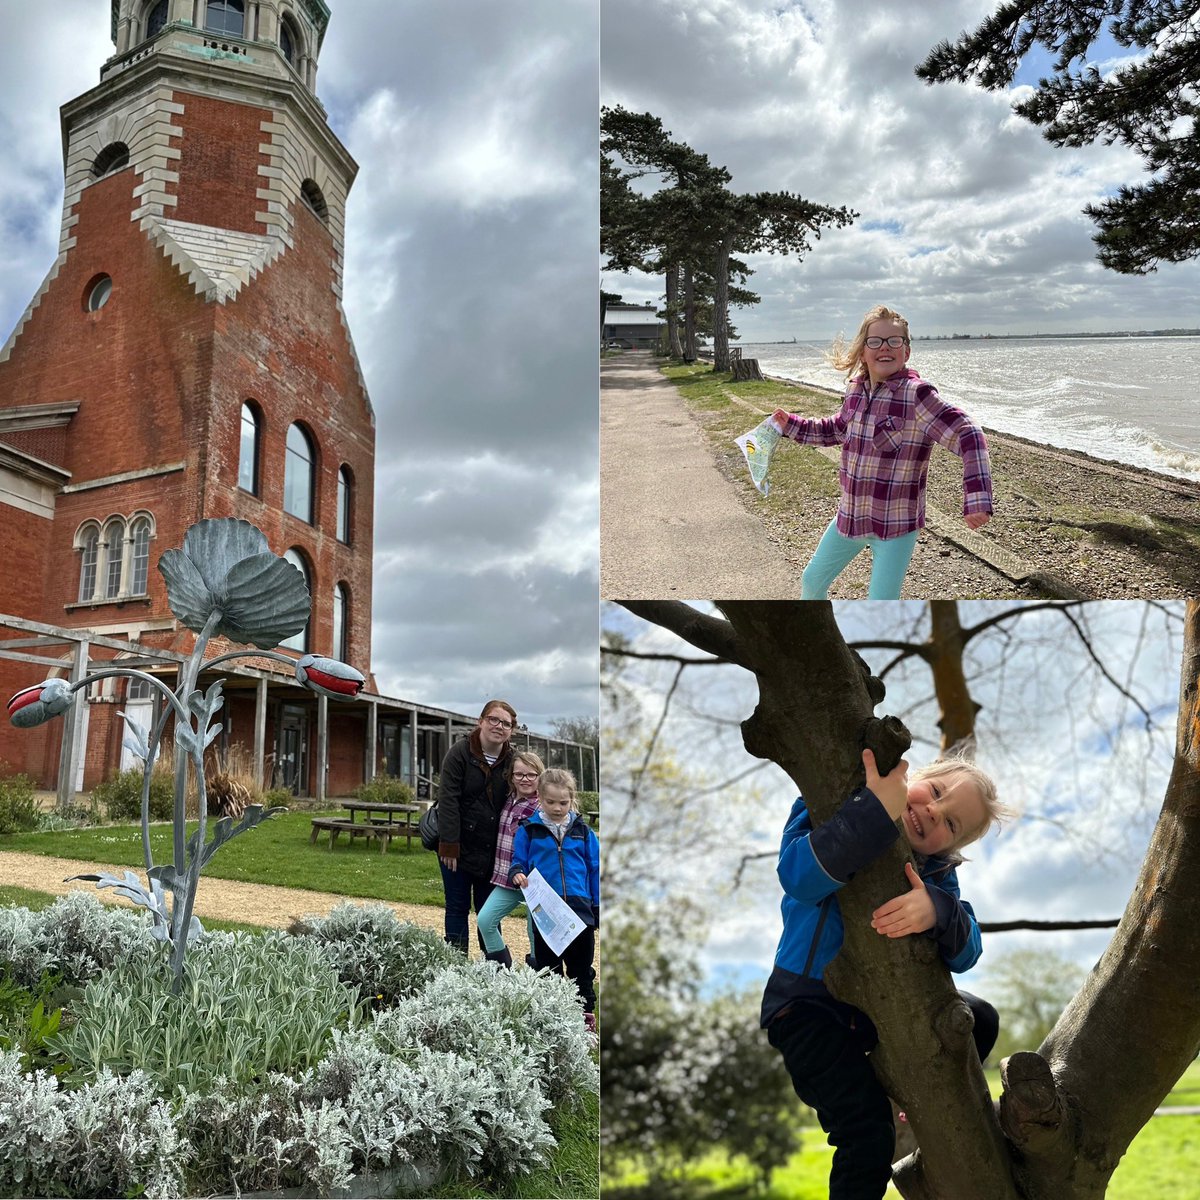 Fab morning and afternoon at the beautiful @RoyalVictoriaCP doing the #EasterTrail well done @HantsCS and @hantsconnect on another cracking holiday activity